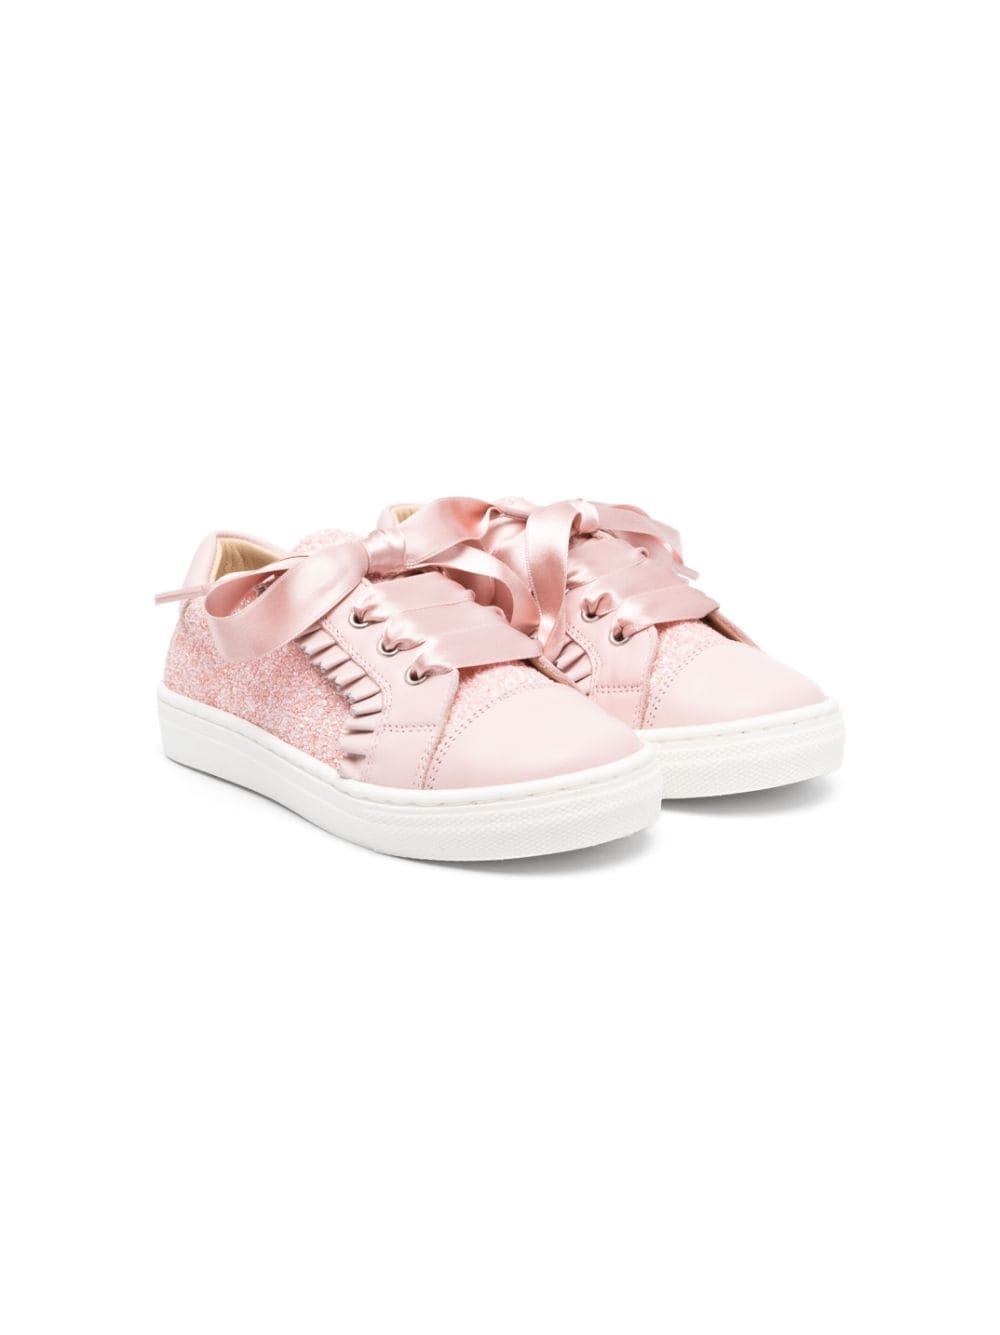 ANDANINES glittery leather sneakers - Pink von ANDANINES